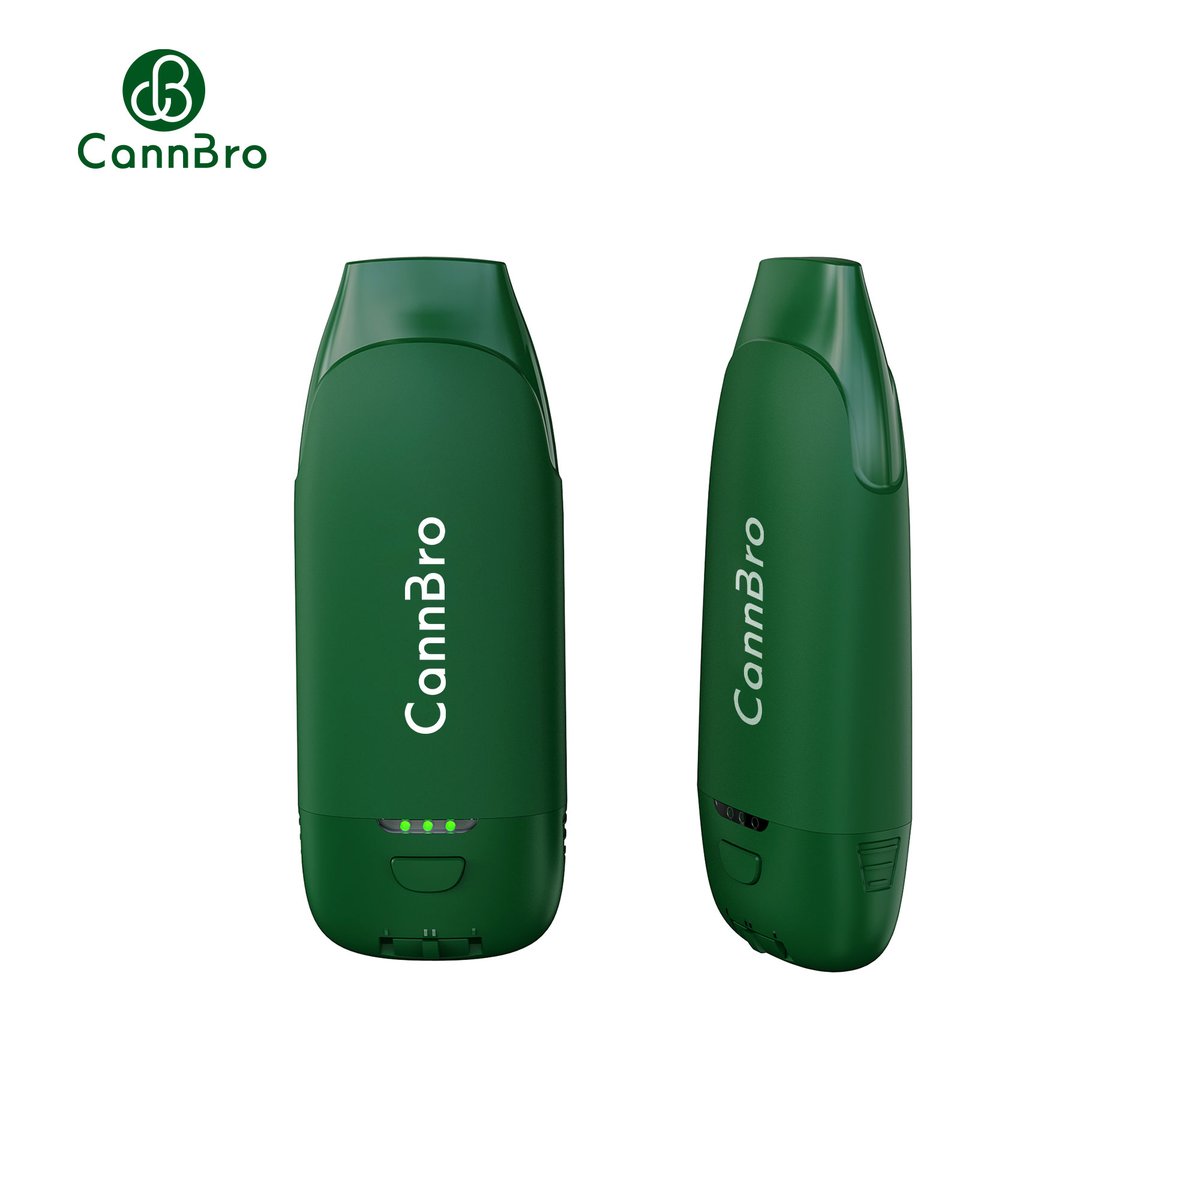 Dual Cartridge Batteries
400mAh Capacity
0.5 ml and 1.0 ml Cart Compatible
Offers consumers more choice and privacy
Vaporize 1 & 2 carts at the same time or separately
More Options Available for P43
Level Up Your Imagination

#CannBro #vape #vapetech #cannabis #cannabismarket